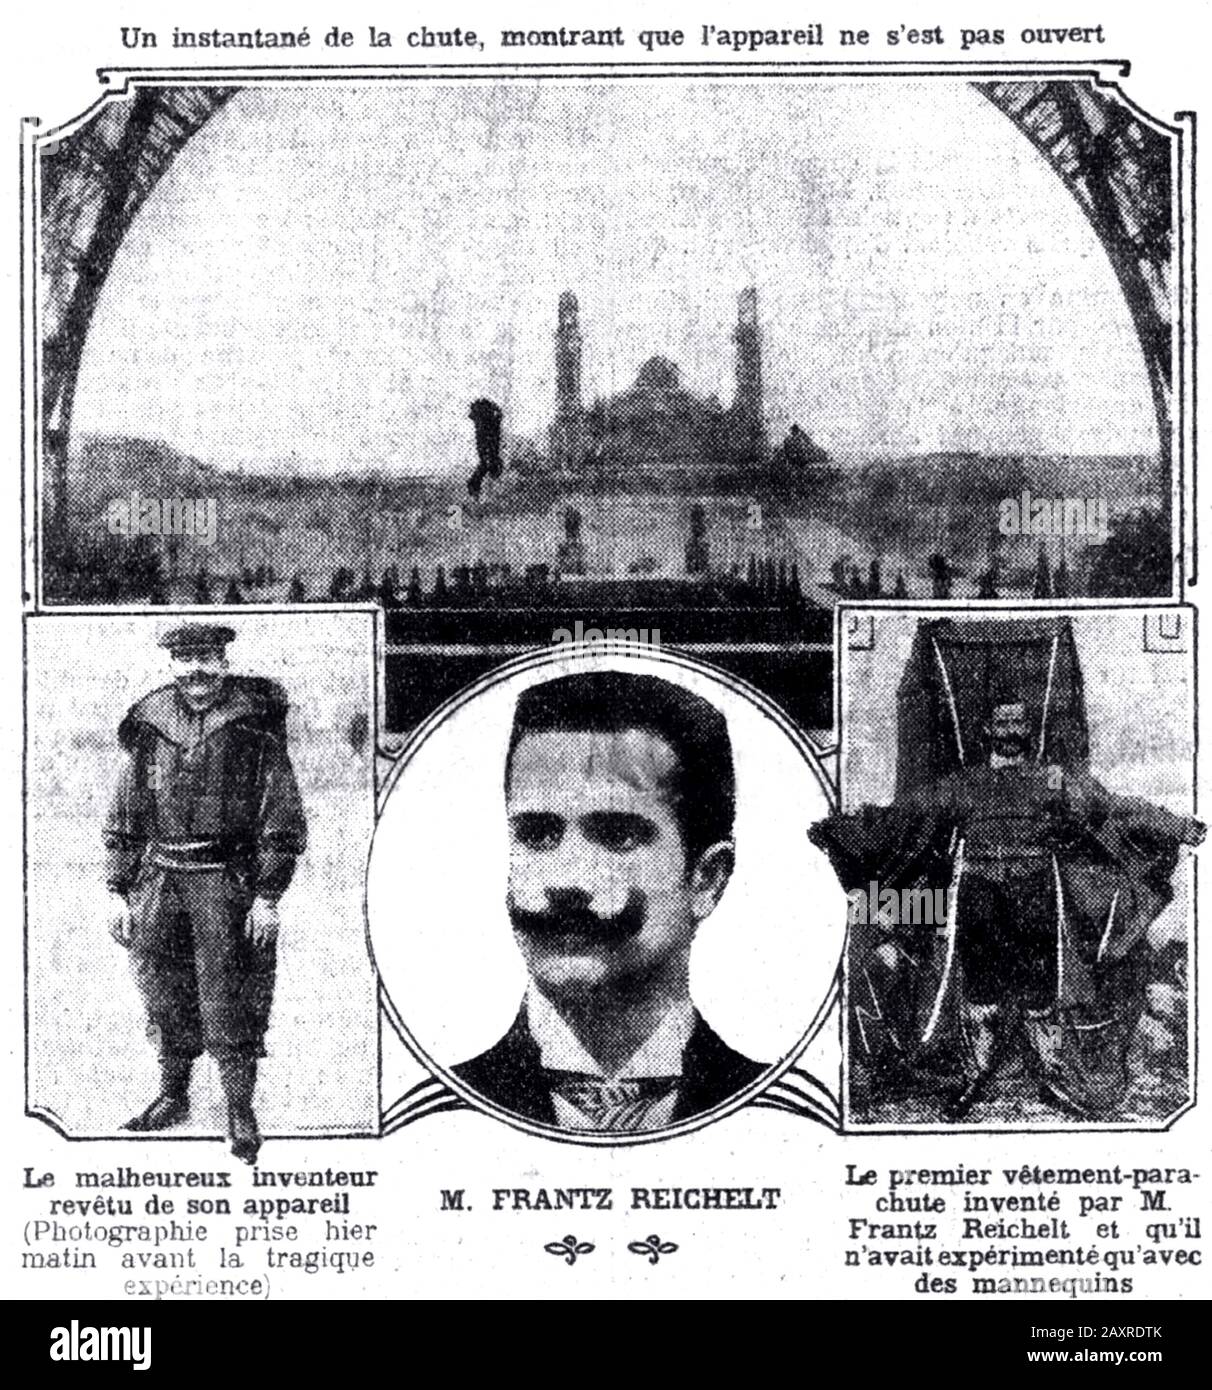 1912 , 4 february, Paris, FRANCE  : The austrian inventor FRANZ REICHELT ( 1879 - 1912 ). Tailor, inventor and parachuting pioneer, ( the Flying Tailor ) who is remembered for jumping to his death from the Eiffel Tower while testing a wearable parachute of his own design. The parachute failed to deploy and he plummeted 57 metres (187 ft) to his death. The next day, newspapers were full of illustrated stories about the death of the 'reckless inventor', and the jump was shown in newsreels.  In this image the photos from the first page of illustrated newspaper LE PETIT PARISIEN ,  5 february 1912 Stock Photo